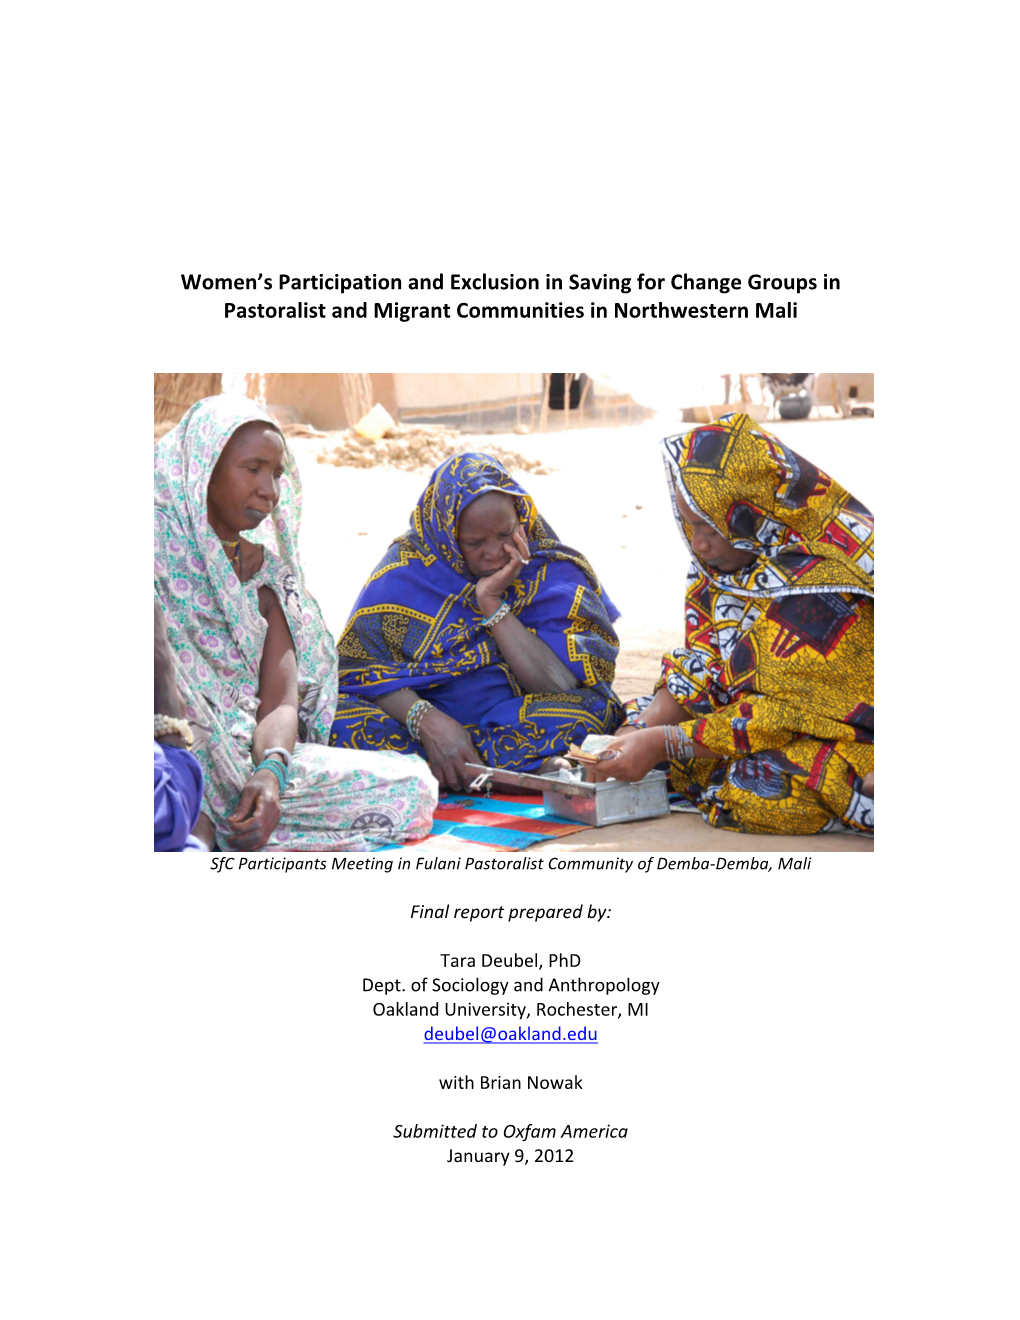 Women's Participation and Exclusion in Saving for Change Groups In